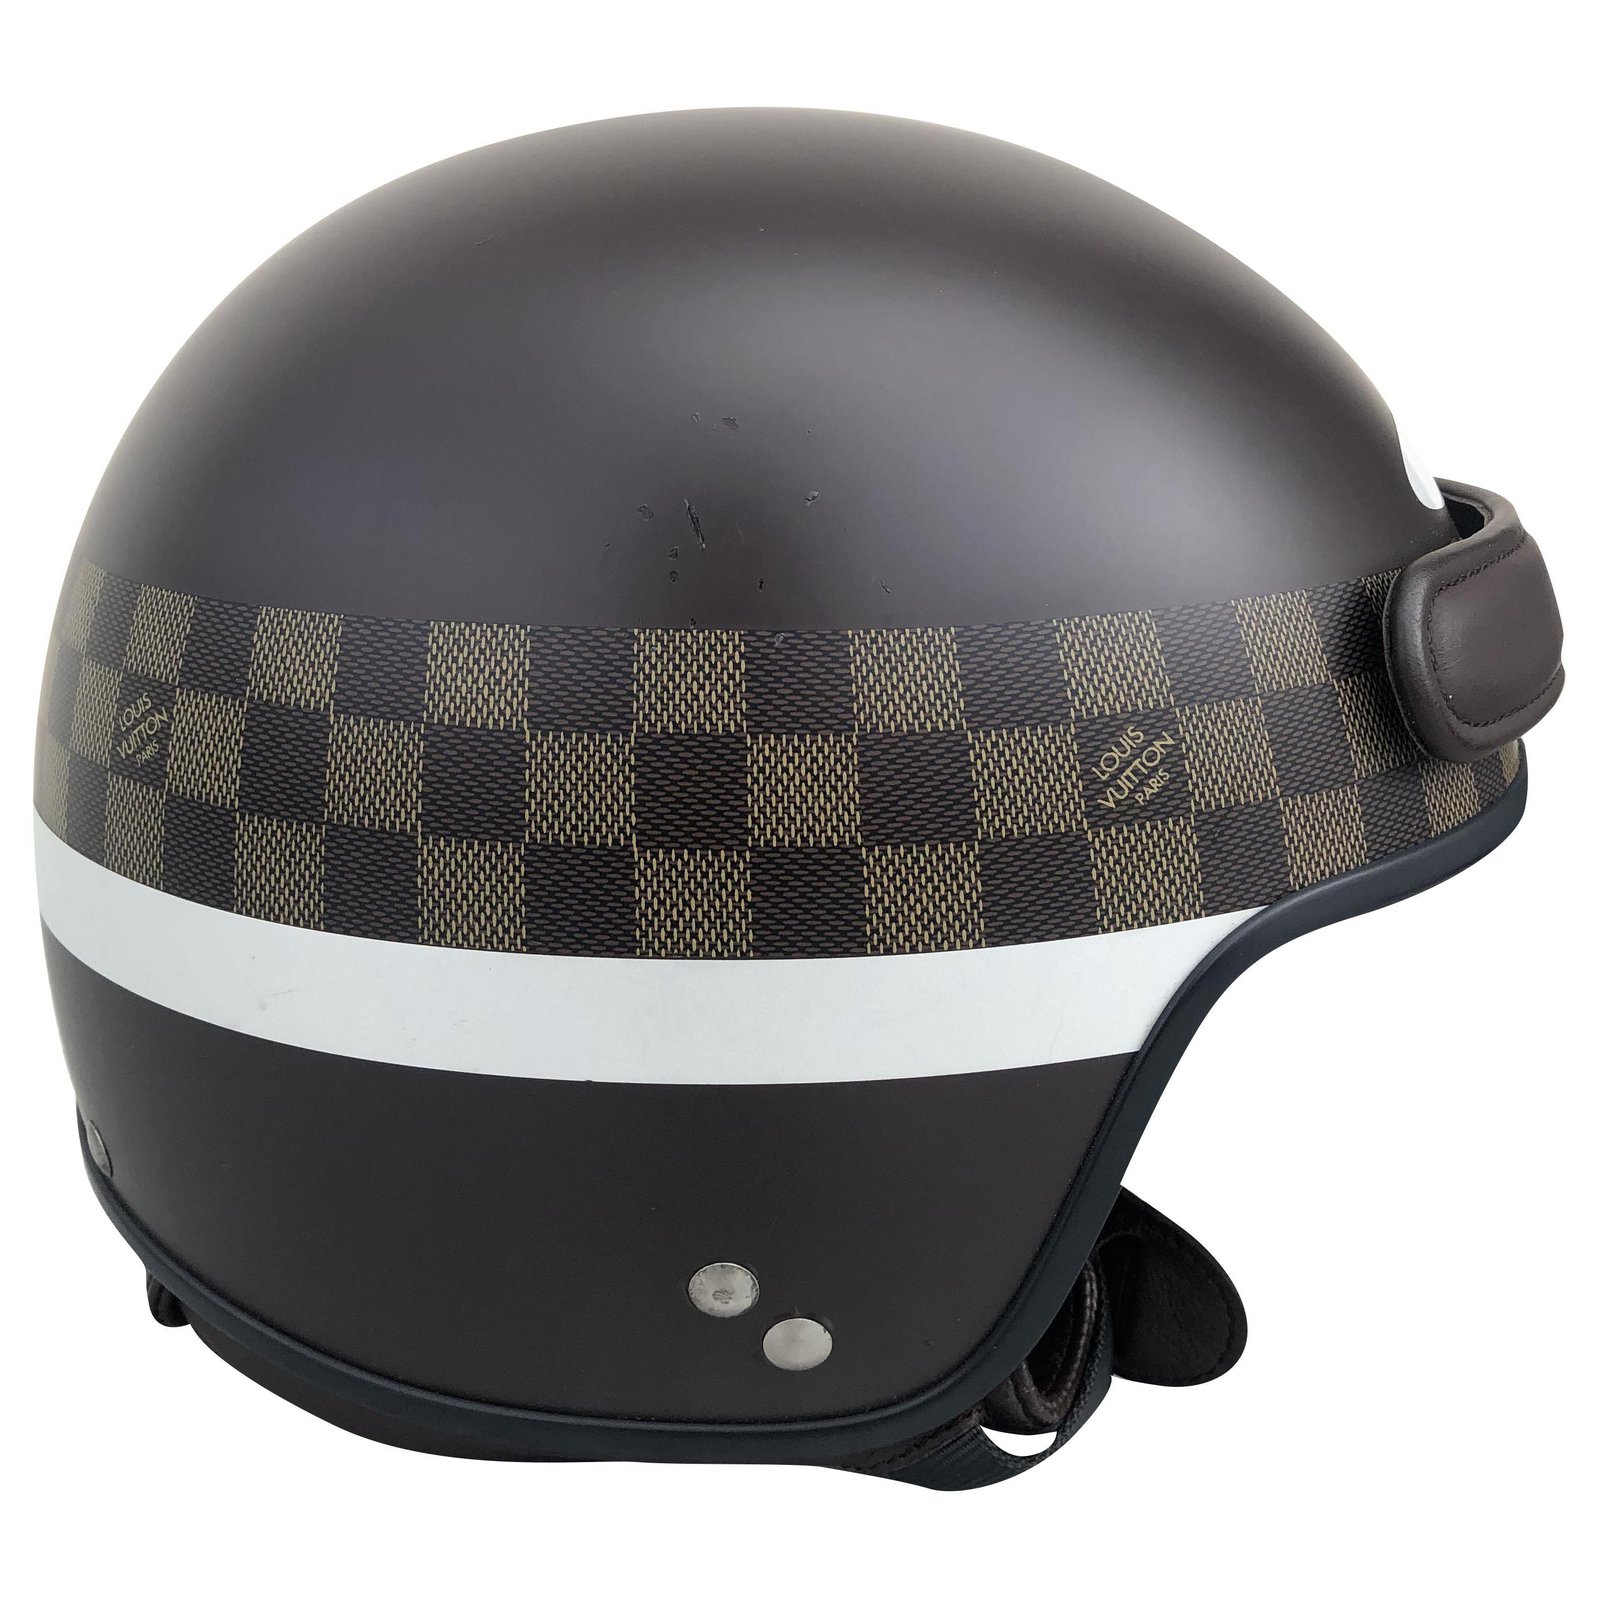 Sold at Auction: Louis Vuitton Motorcycle Helmet